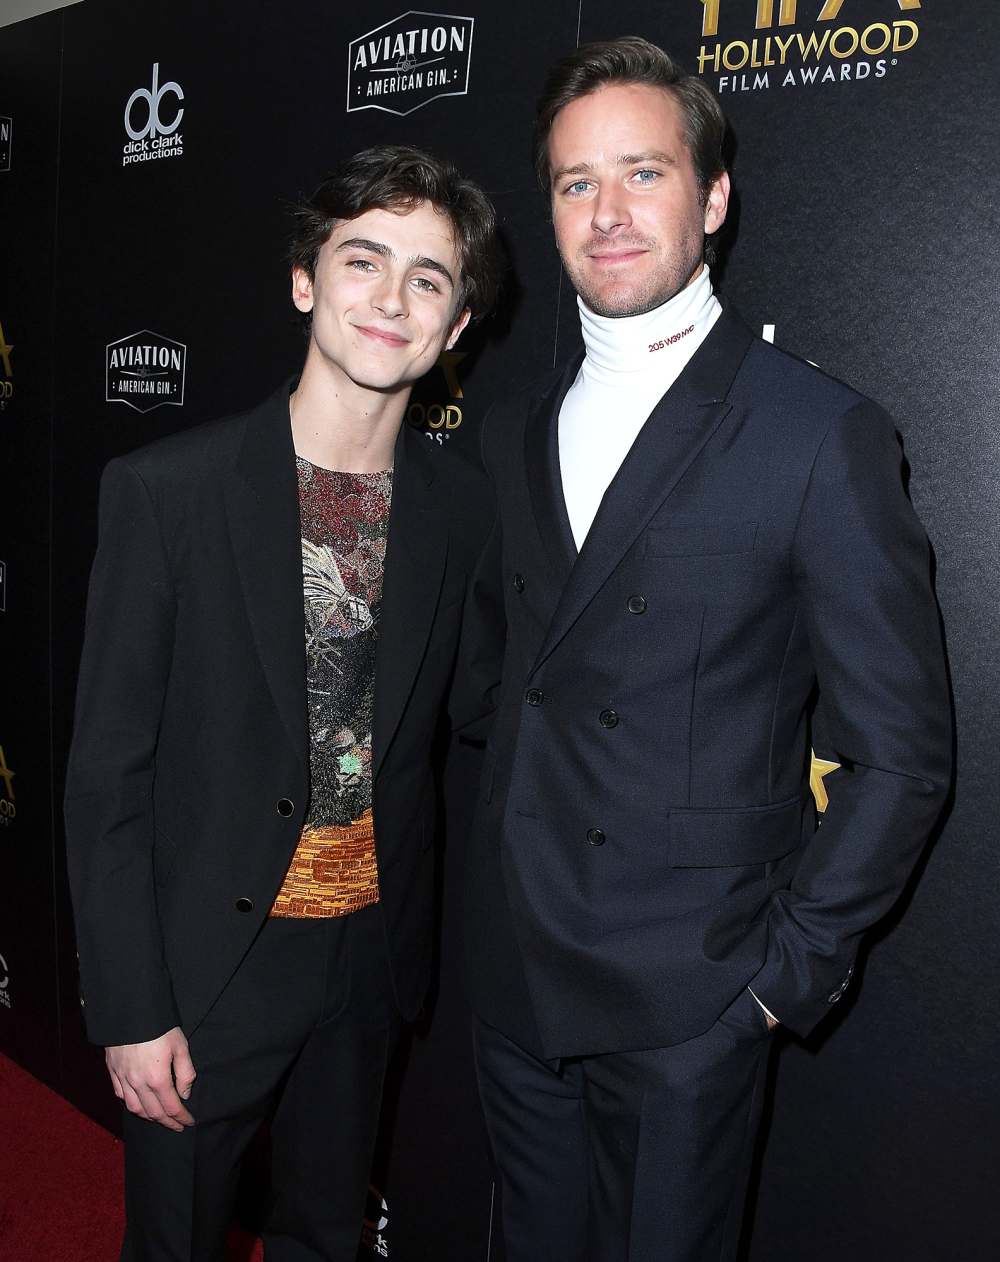 Timothee Chalamet Name-Drops Armie Hammer Offers to FaceTime Steve Carell While Flying Coach Next to Superfan